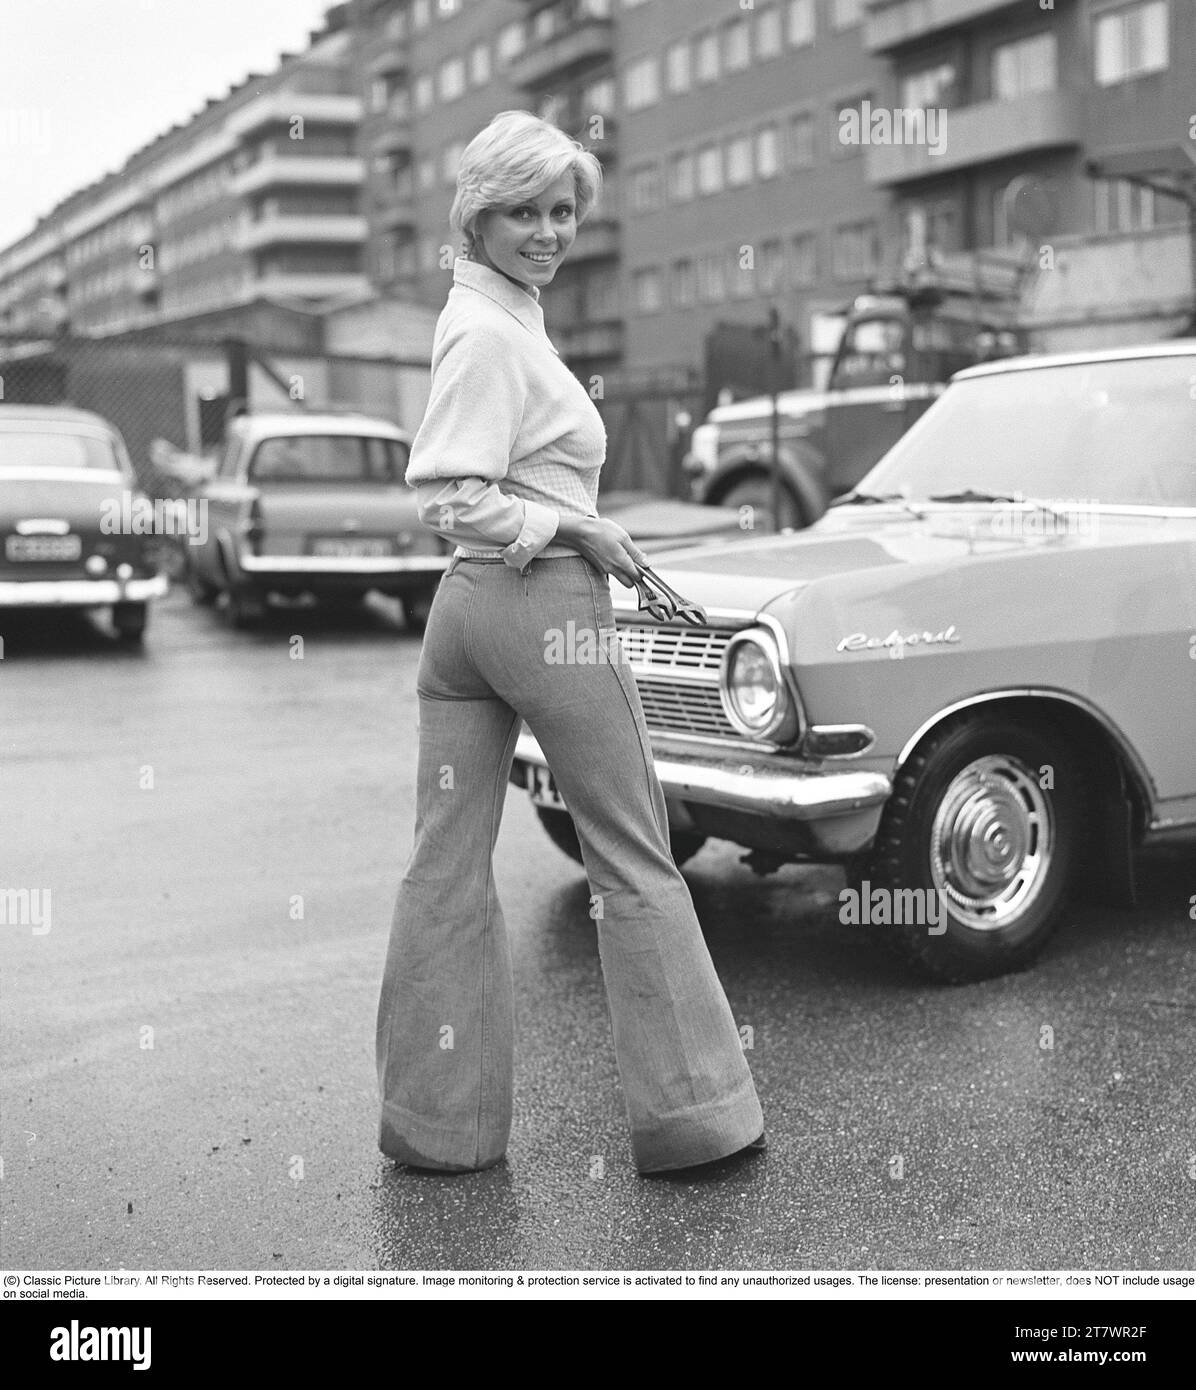 https://c8.alamy.com/comp/2T7WR2F/fashion-of-the-1970s-a-young-woman-wearing-the-typical-fashion-of-the-1970s-wide-legged-trousers-a-style-called-bell-bottoms-or-flares-trousers-that-become-wider-from-the-knees-and-downward-forming-a-bell-like-shape-of-the-trouser-leg-1971-kristoffersson-ref-ef65-2T7WR2F.jpg